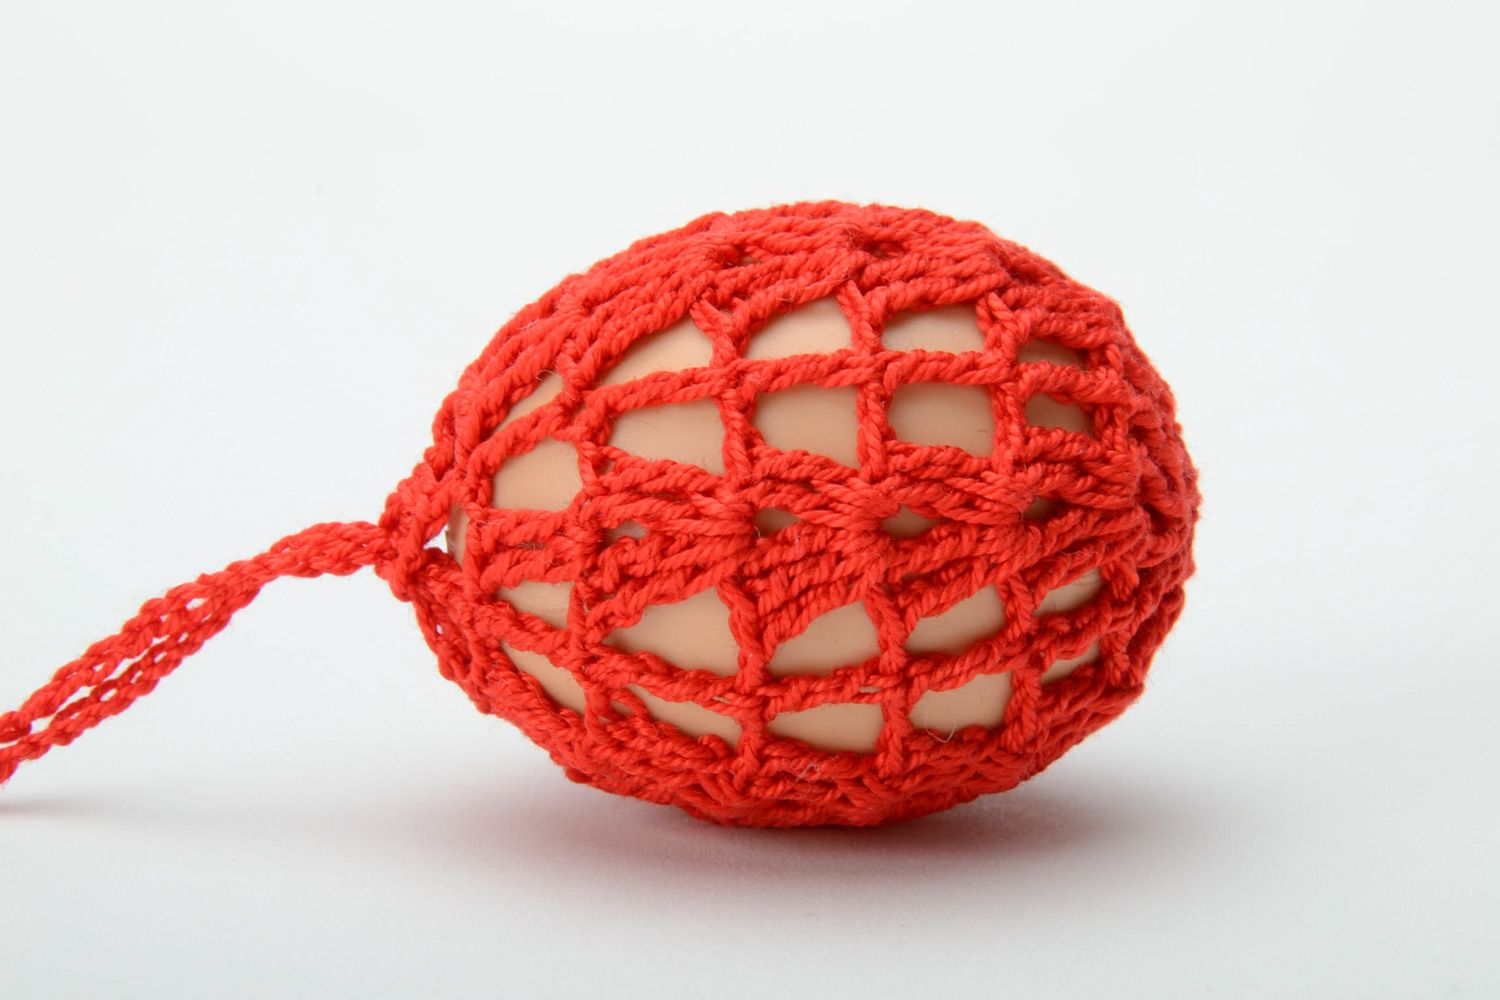 Homemade red decorative Easter egg woven over with threads photo 4